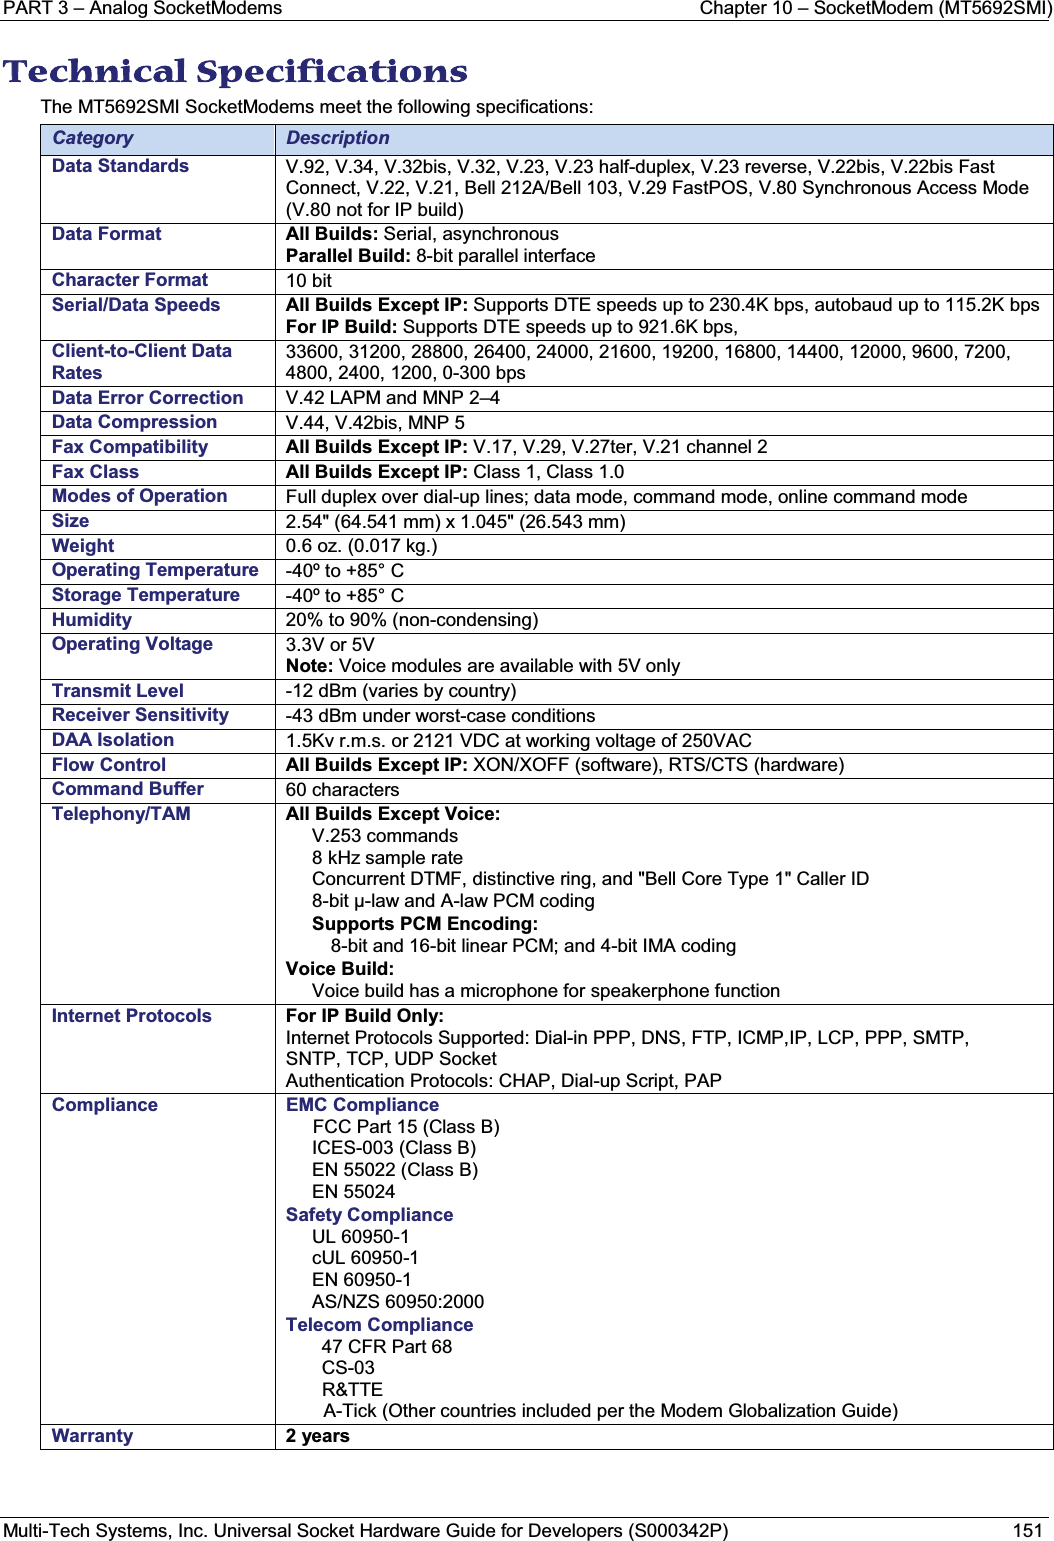 PART 3 – Analog SocketModems Chapter 10 – SocketModem (MT5692SMI)Multi-Tech Systems, Inc. Universal Socket Hardware Guide for Developers (S000342P) 151TTechnical Specifications  The MT5692SMI SocketModems meet the following specifications:Category DescriptionData Standards V.92, V.34, V.32bis, V.32, V.23, V.23 half-duplex, V.23 reverse, V.22bis, V.22bis FastConnect, V.22, V.21, Bell 212A/Bell 103, V.29 FastPOS, V.80 Synchronous Access Mode(V.80 not for IP build)Data Format All Builds: Serial, asynchronousParallel Build: 8-bit parallel interface Character Format 10 bit   Serial/Data Speeds  All Builds Except IP: Supports DTE speeds up to 230.4K bps, autobaud up to 115.2K bpsFor IP Build: Supports DTE speeds up to 921.6K bps,Client-to-Client Data Rates33600, 31200, 28800, 26400, 24000, 21600, 19200, 16800, 14400, 12000, 9600, 7200, 4800, 2400, 1200, 0-300 bpsData Error Correction V.42 LAPM and MNP 2–4Data Compression V.44, V.42bis, MNP 5Fax Compatibility  All Builds Except IP: V.17, V.29, V.27ter, V.21 channel 2 Fax Class All Builds Except IP: Class 1, Class 1.0Modes of Operation Full duplex over dial-up lines; data mode, command mode, online command modeSize  2.54&quot; (64.541 mm) x 1.045&quot; (26.543 mm) Weight 0.6 oz. (0.017 kg.) Operating Temperature -40º to +85° CStorage Temperature -40º to +85° CHumidity 20% to 90% (non-condensing)Operating Voltage 3.3V or 5VNote: Voice modules are available with 5V only Transmit Level -12 dBm (varies by country)Receiver Sensitivity -43 dBm under worst-case conditionsDAA Isolation 1.5Kv r.m.s. or 2121 VDC at working voltage of 250VACFlow Control All Builds Except IP: XON/XOFF (software), RTS/CTS (hardware)Command Buffer 60 characters Telephony/TAM All Builds Except Voice:V.253 commands8 kHz sample rateConcurrent DTMF, distinctive ring, and &quot;Bell Core Type 1&quot; Caller ID8-bit ȝ-law and A-law PCM codingSupports PCM Encoding:8-bit and 16-bit linear PCM; and 4-bit IMA codingVoice Build:Voice build has a microphone for speakerphone functionInternet Protocols For IP Build Only:Internet Protocols Supported: Dial-in PPP, DNS, FTP, ICMP,IP, LCP, PPP, SMTP,SNTP, TCP, UDP SocketAuthentication Protocols: CHAP, Dial-up Script, PAPCompliance EMC ComplianceFCC Part 15 (Class B)ICES-003 (Class B)EN 55022 (Class B)EN 55024Safety ComplianceUL 60950-1cUL 60950-1EN 60950-1AS/NZS 60950:2000Telecom Compliance47 CFR Part 68CS-03R&amp;TTEA-Tick (Other countries included per the Modem Globalization Guide)Warranty 2 years